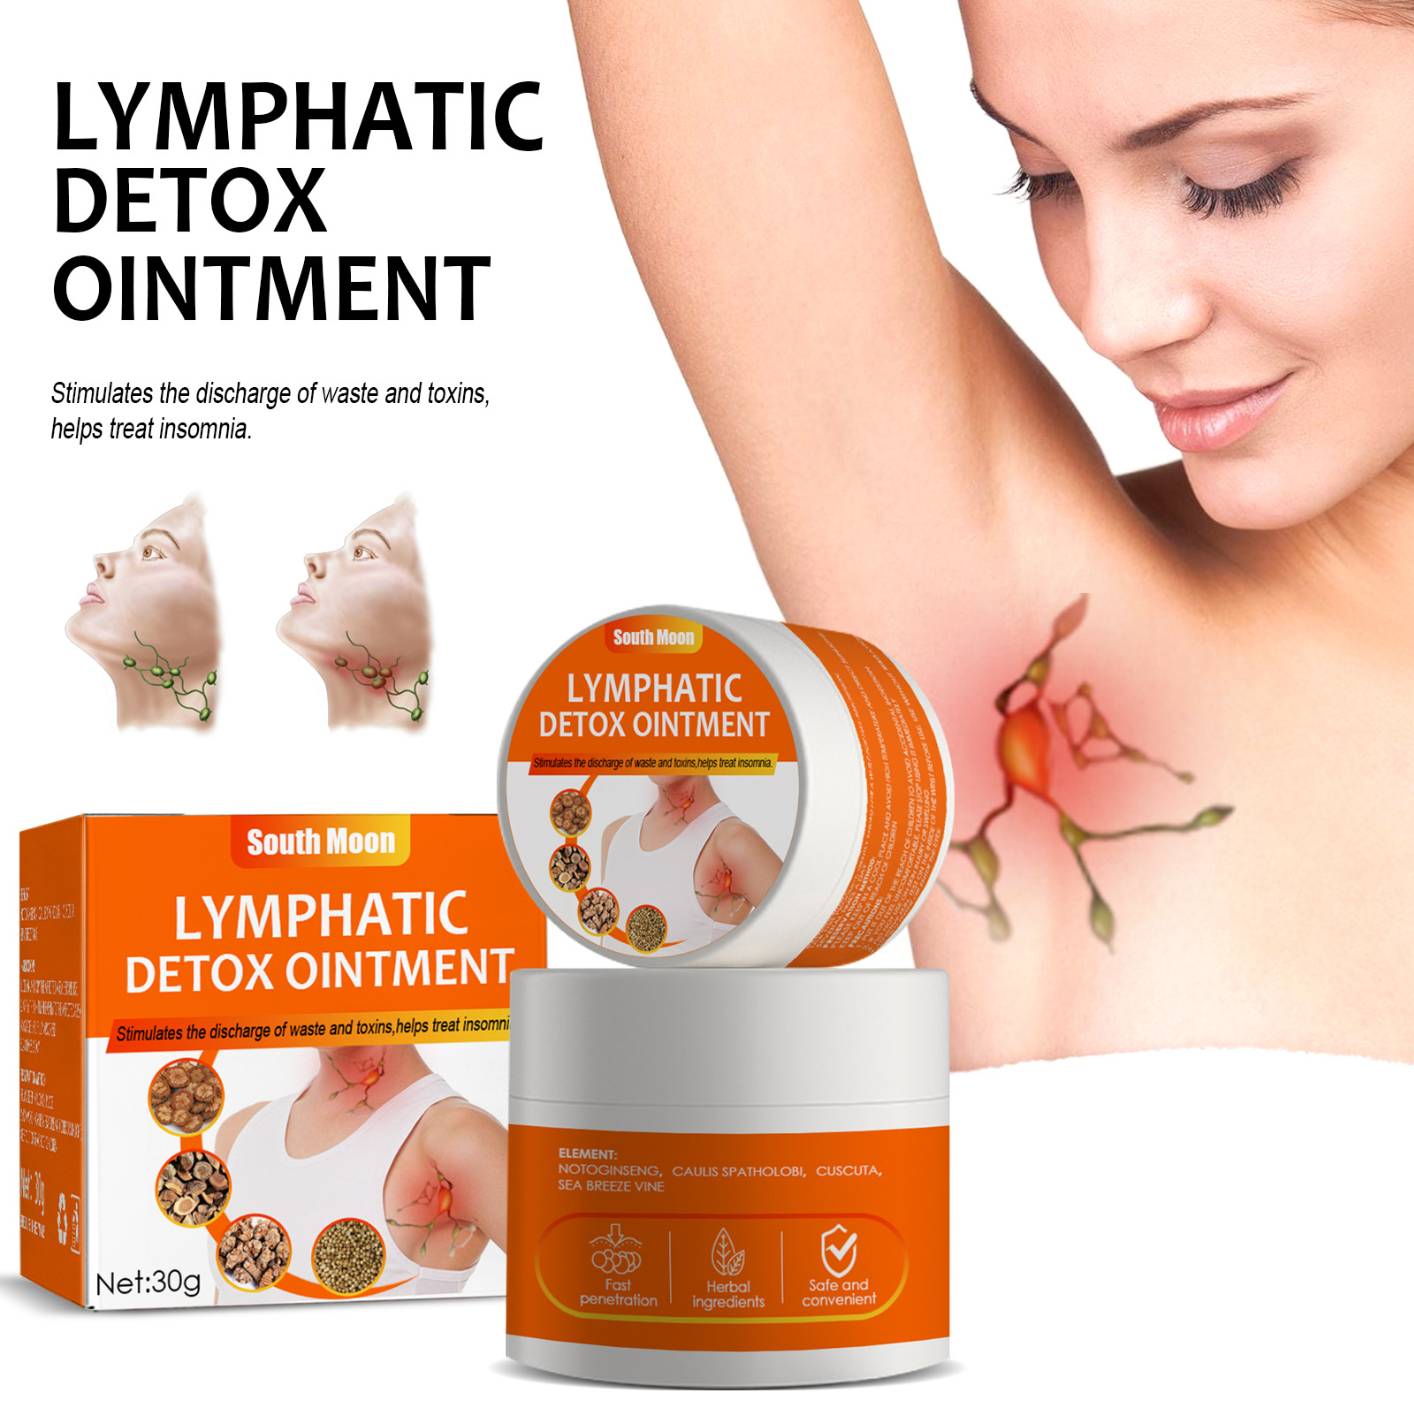 Lymphatic Drainage Ointment for Neck Anti Swelling Detox Treatment, Lymph Care Ointment,Cream,Armpit Lymph Node Ointment for Health Care,for All Skin Types